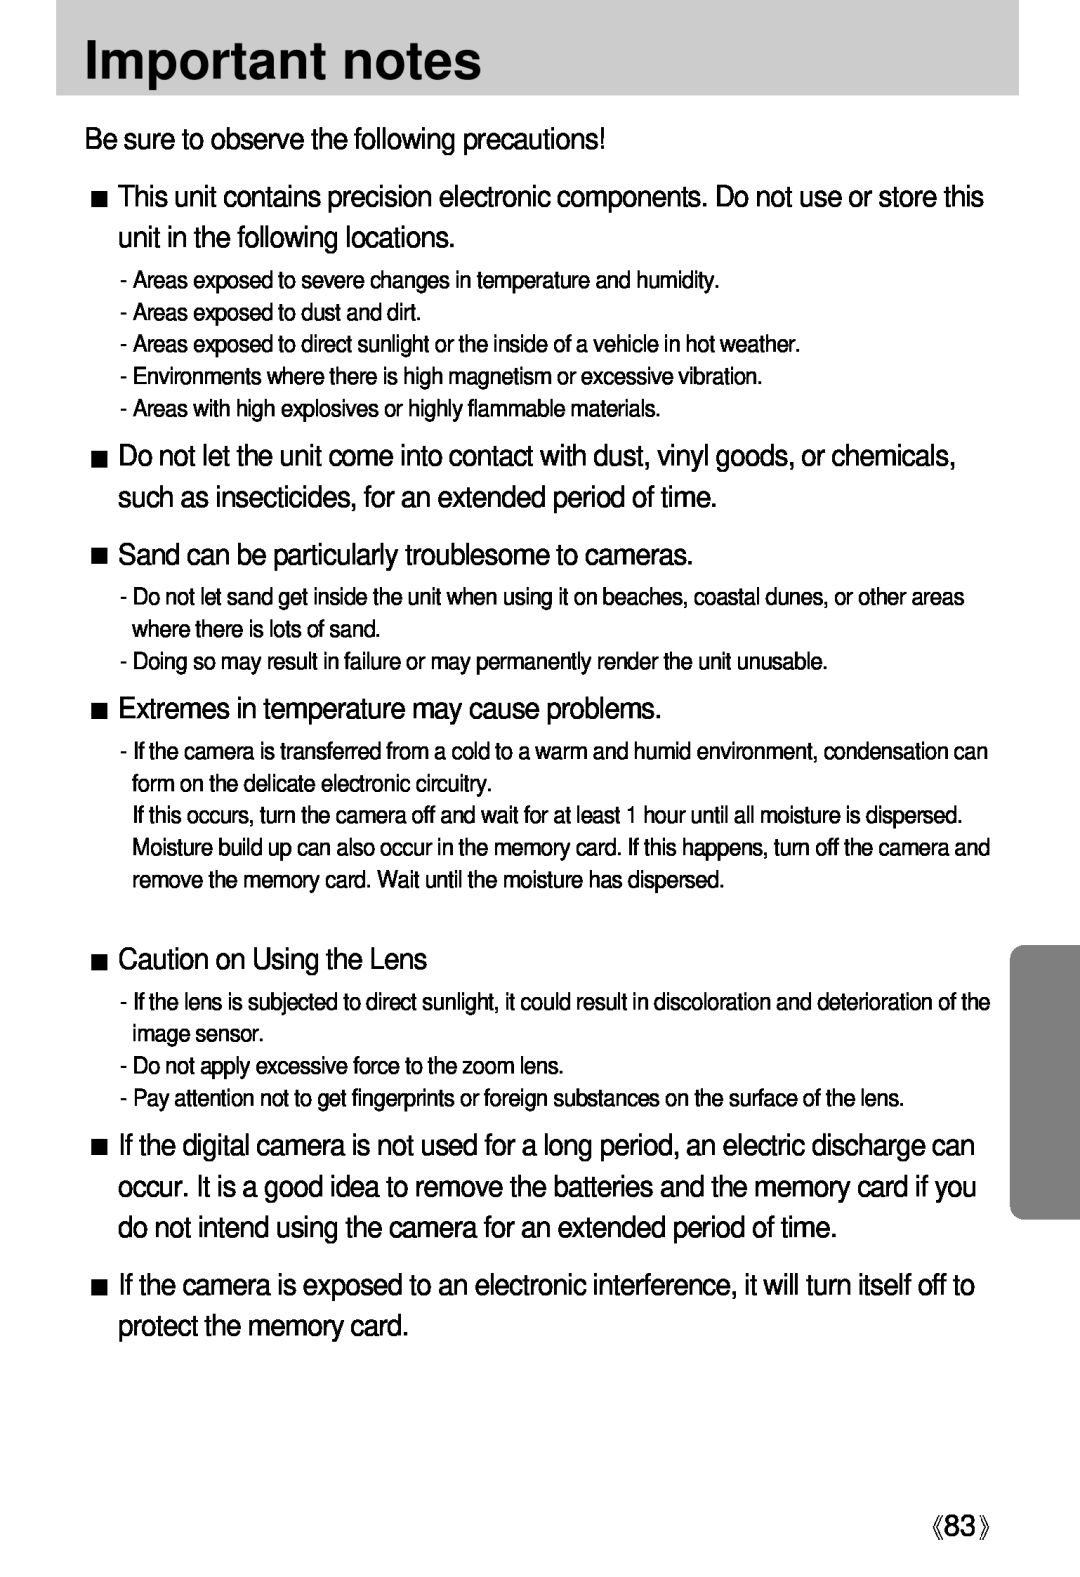 Samsung Digimax U-CA user manual Important notes, Be sure to observe the following precautions, Caution on Using the Lens 